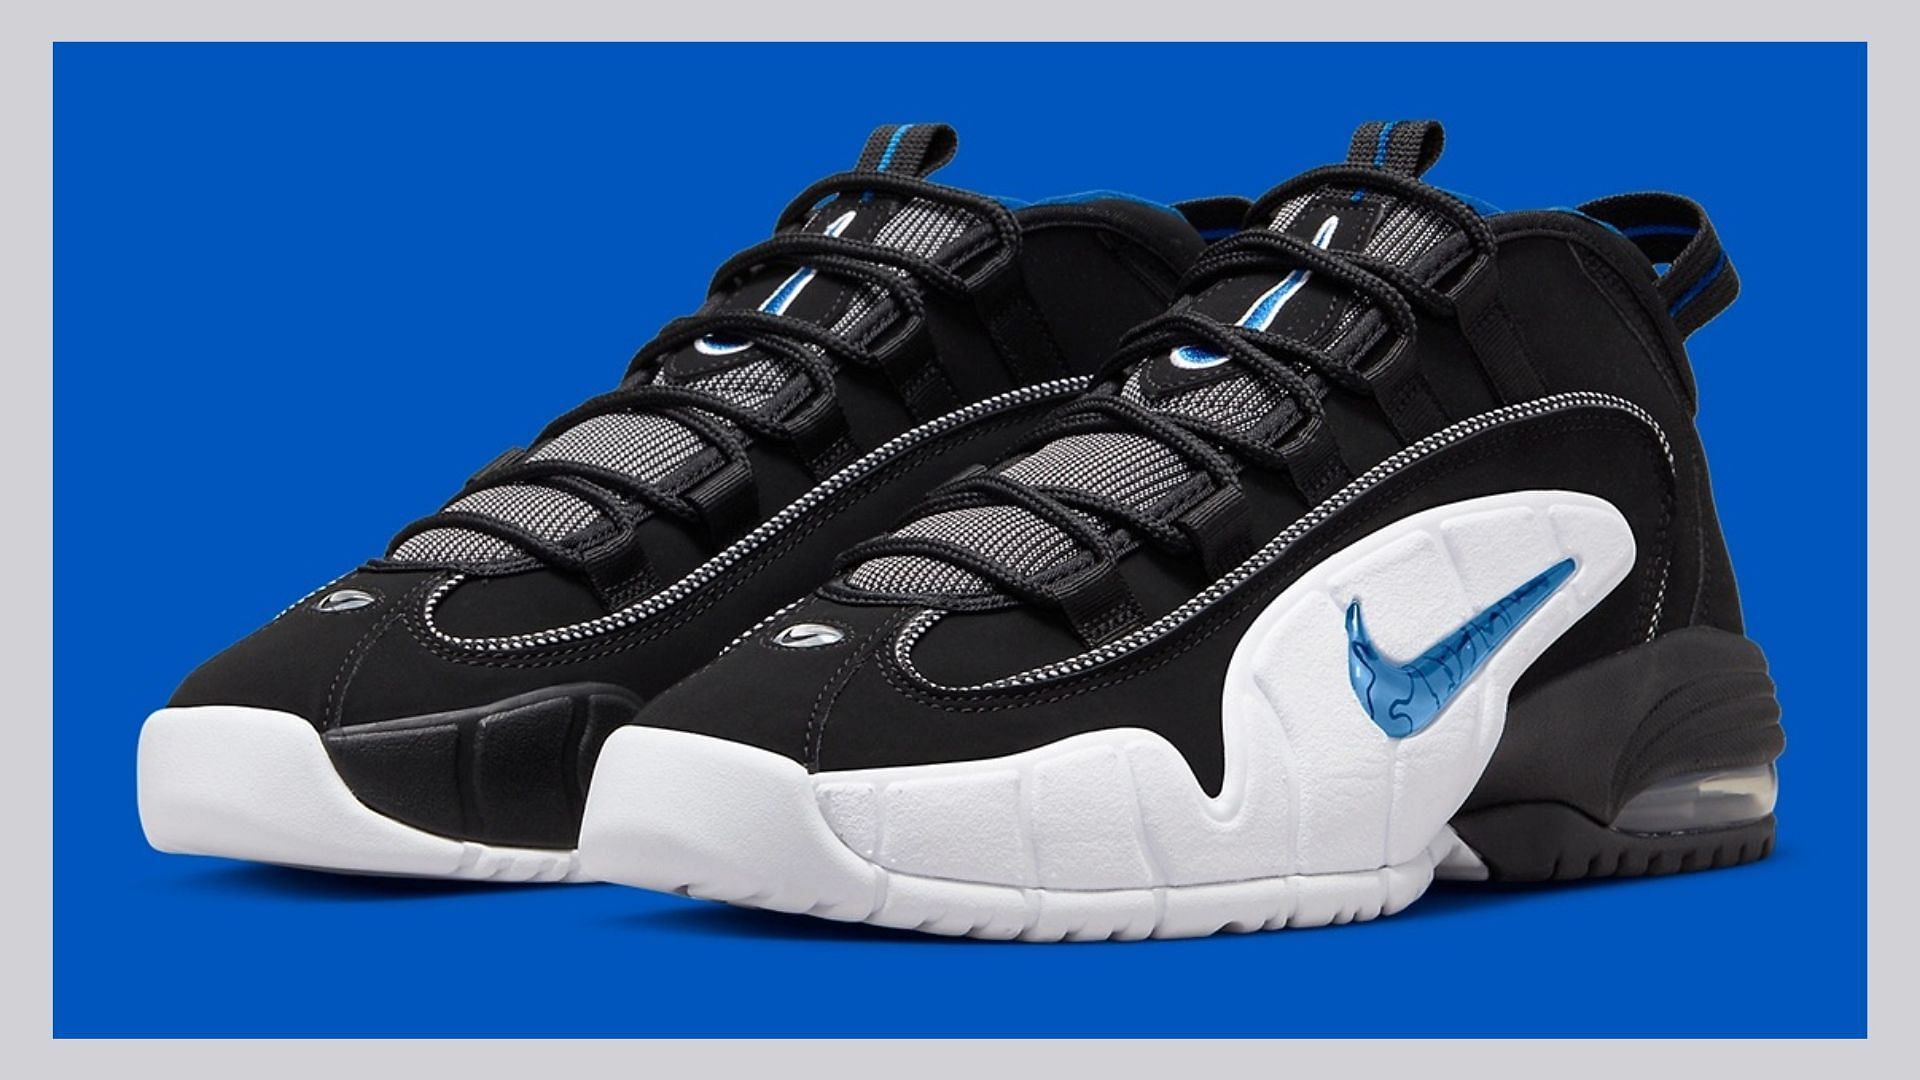 Where to buy Nike Air Max Penny 1 “Orlando” colorway? Price, release